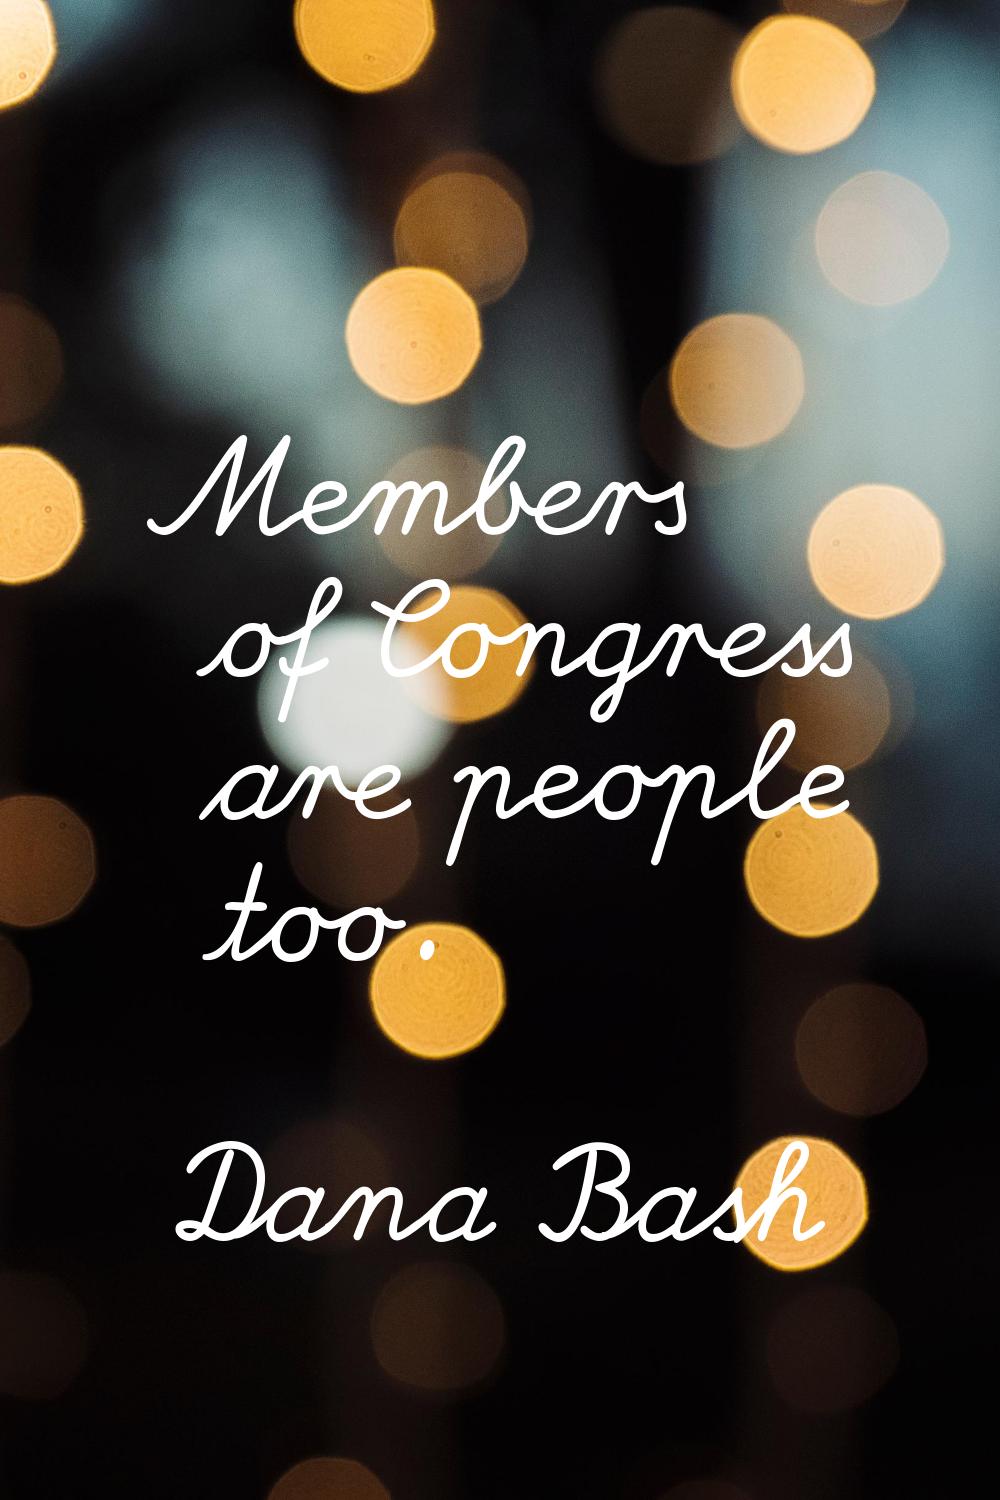 Members of Congress are people too.